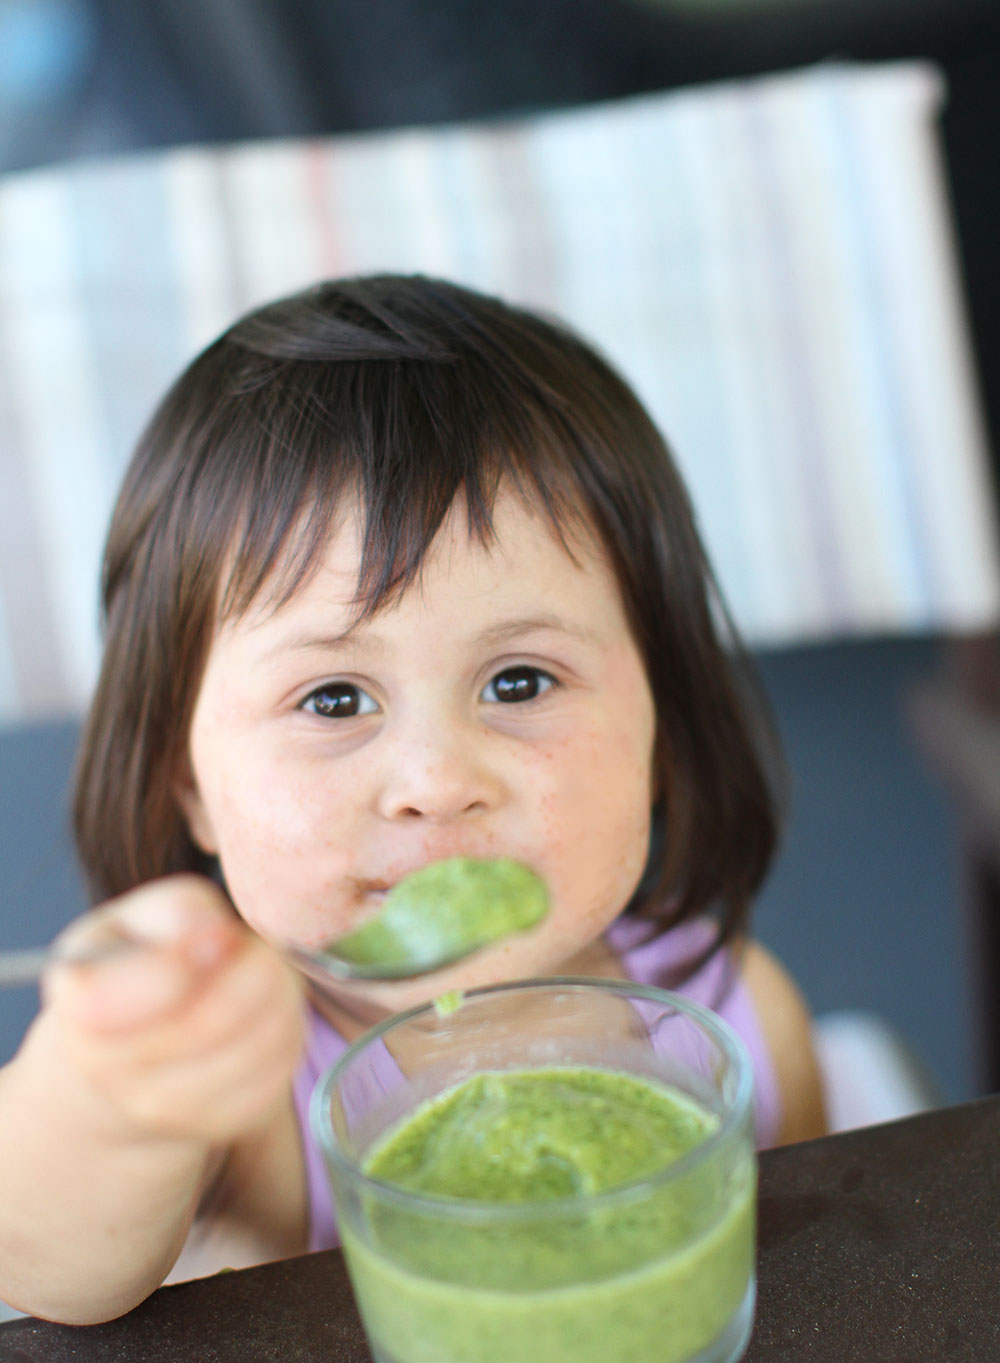 Morning-Green-Smoothie-recipe-for-kids-Little-Hero-Project